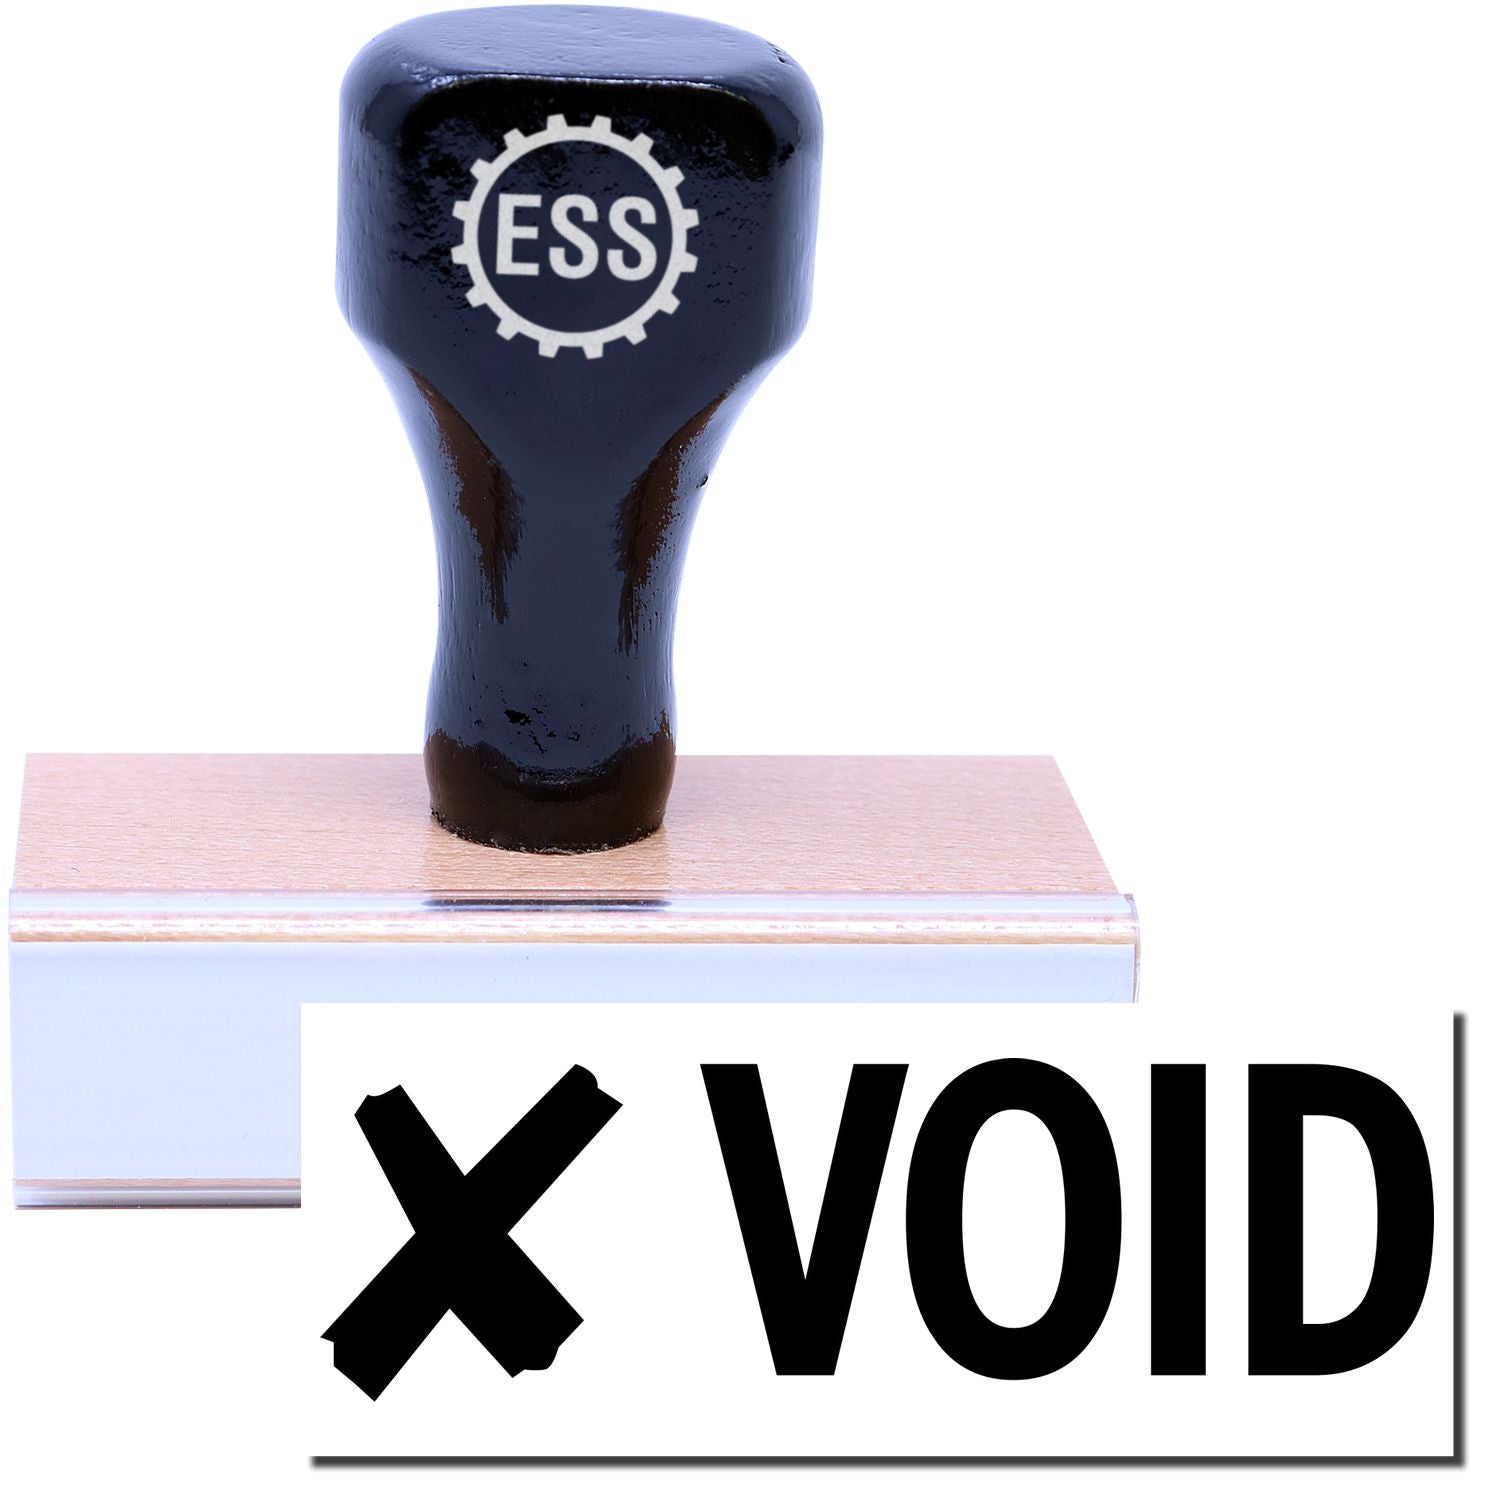 A stock office rubber stamp with a stamped image showing how the text "VOID" with a cross sign (X) on the left side is displayed after stamping.